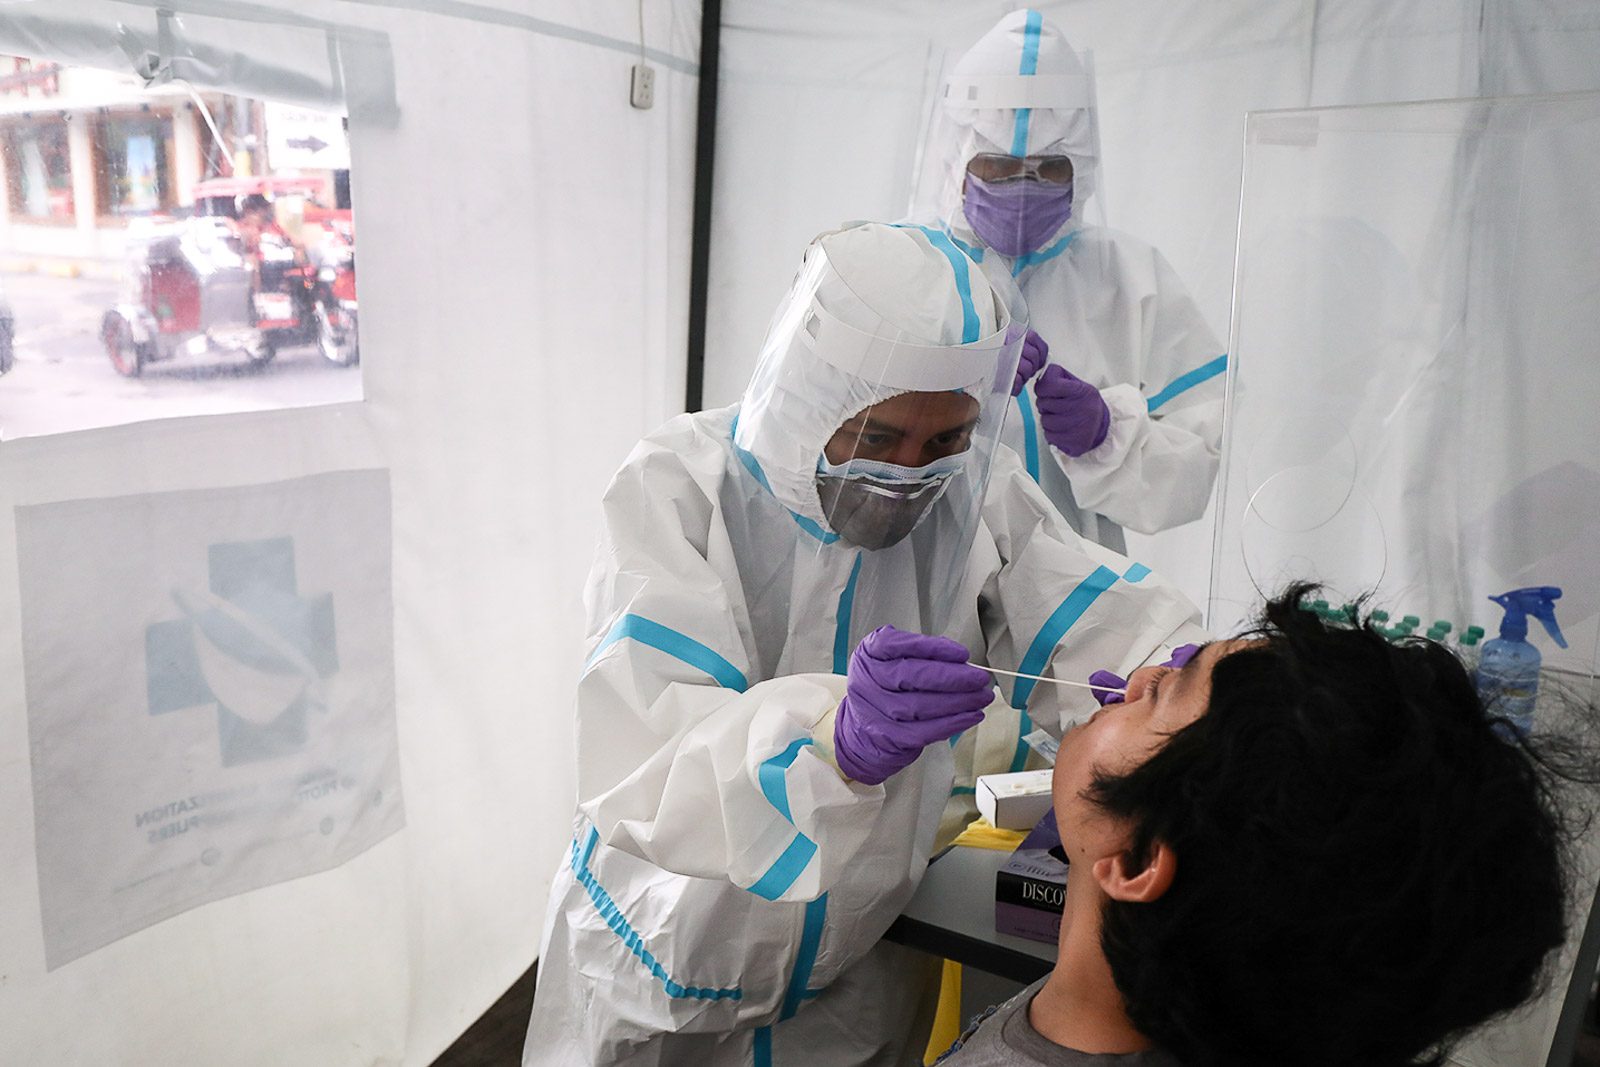 Gov’t targets to have 66 coronavirus testing hubs by May 31